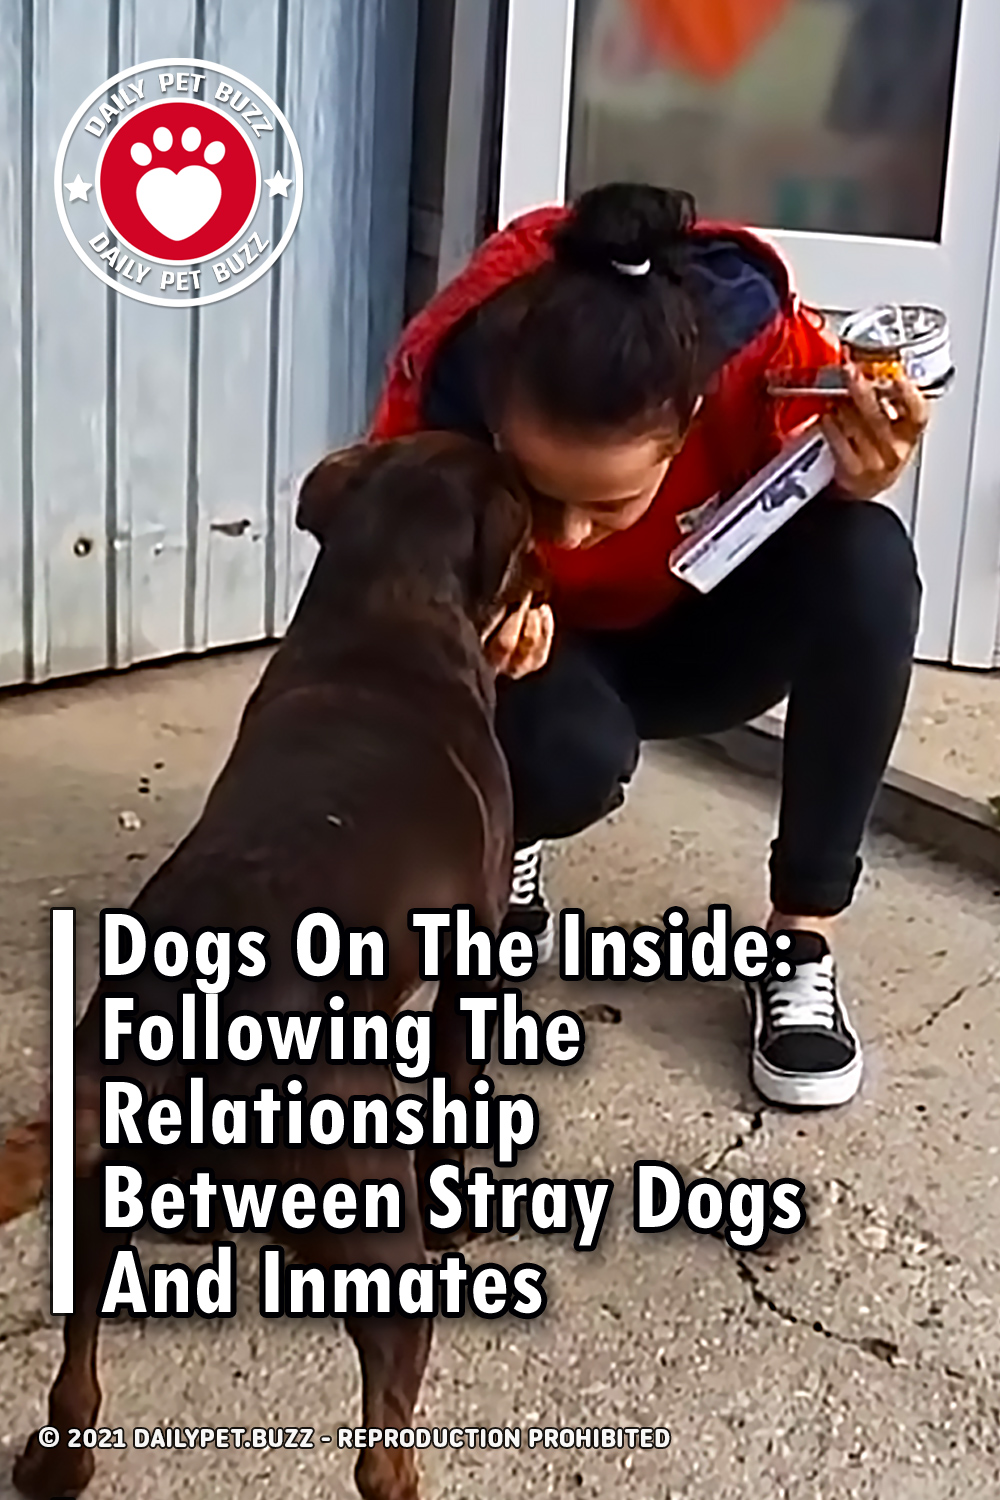 Dogs On The Inside: Following The Relationship Between Stray Dogs And Inmates